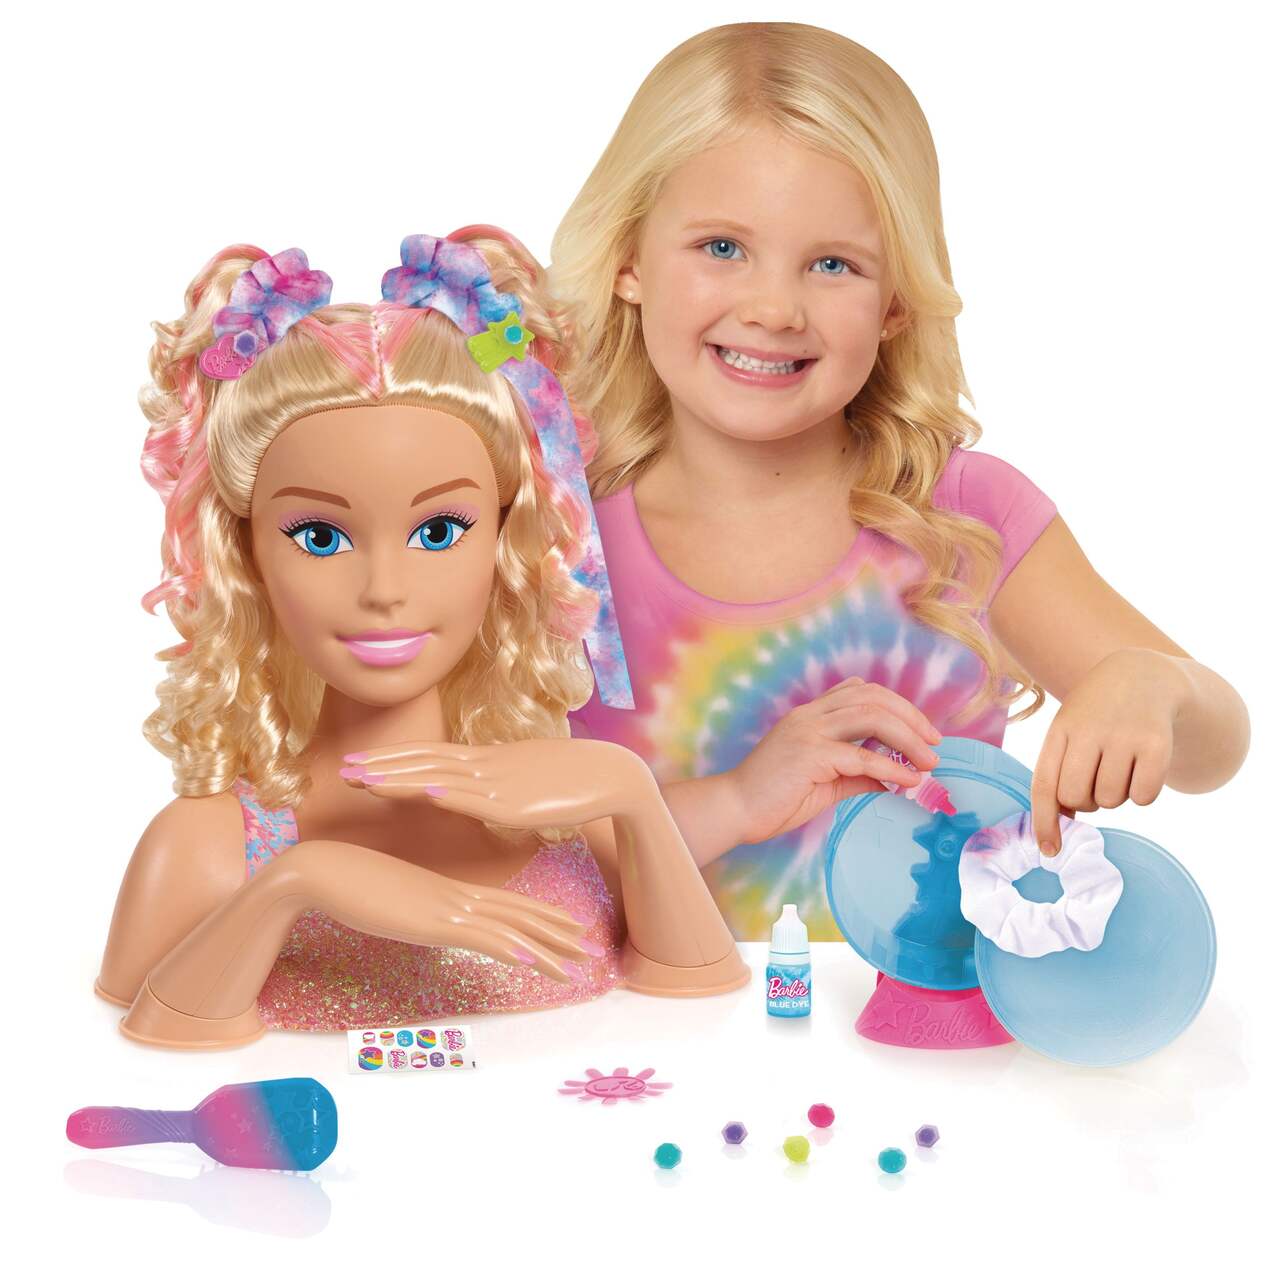 Barbie® Cut, Colour & Curl Deluxe Styling Head, Ages 3+